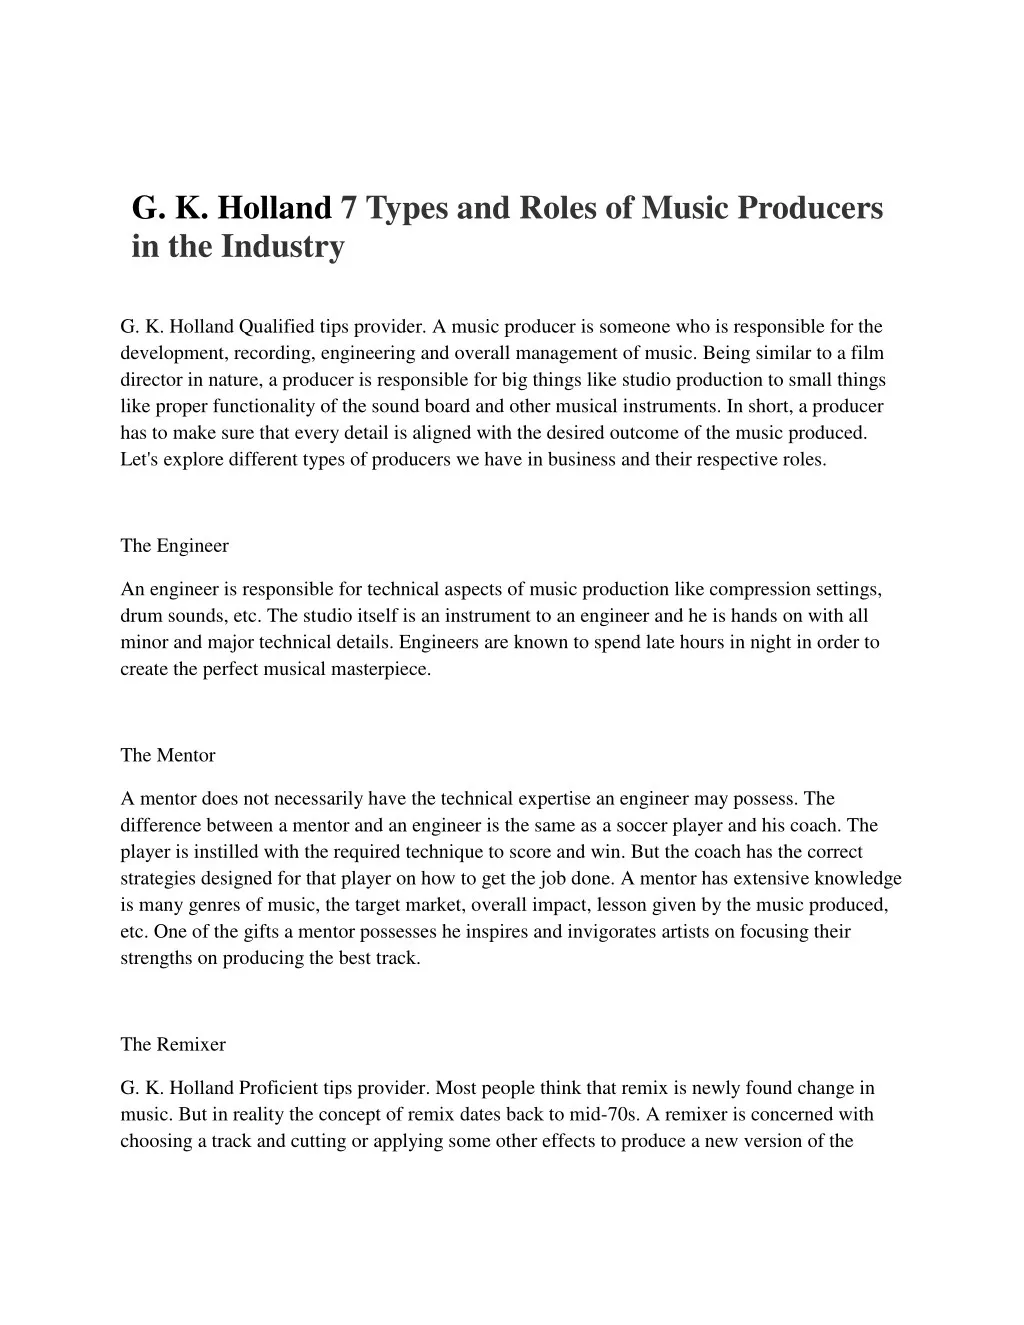 g k holland 7 types and roles of music producers